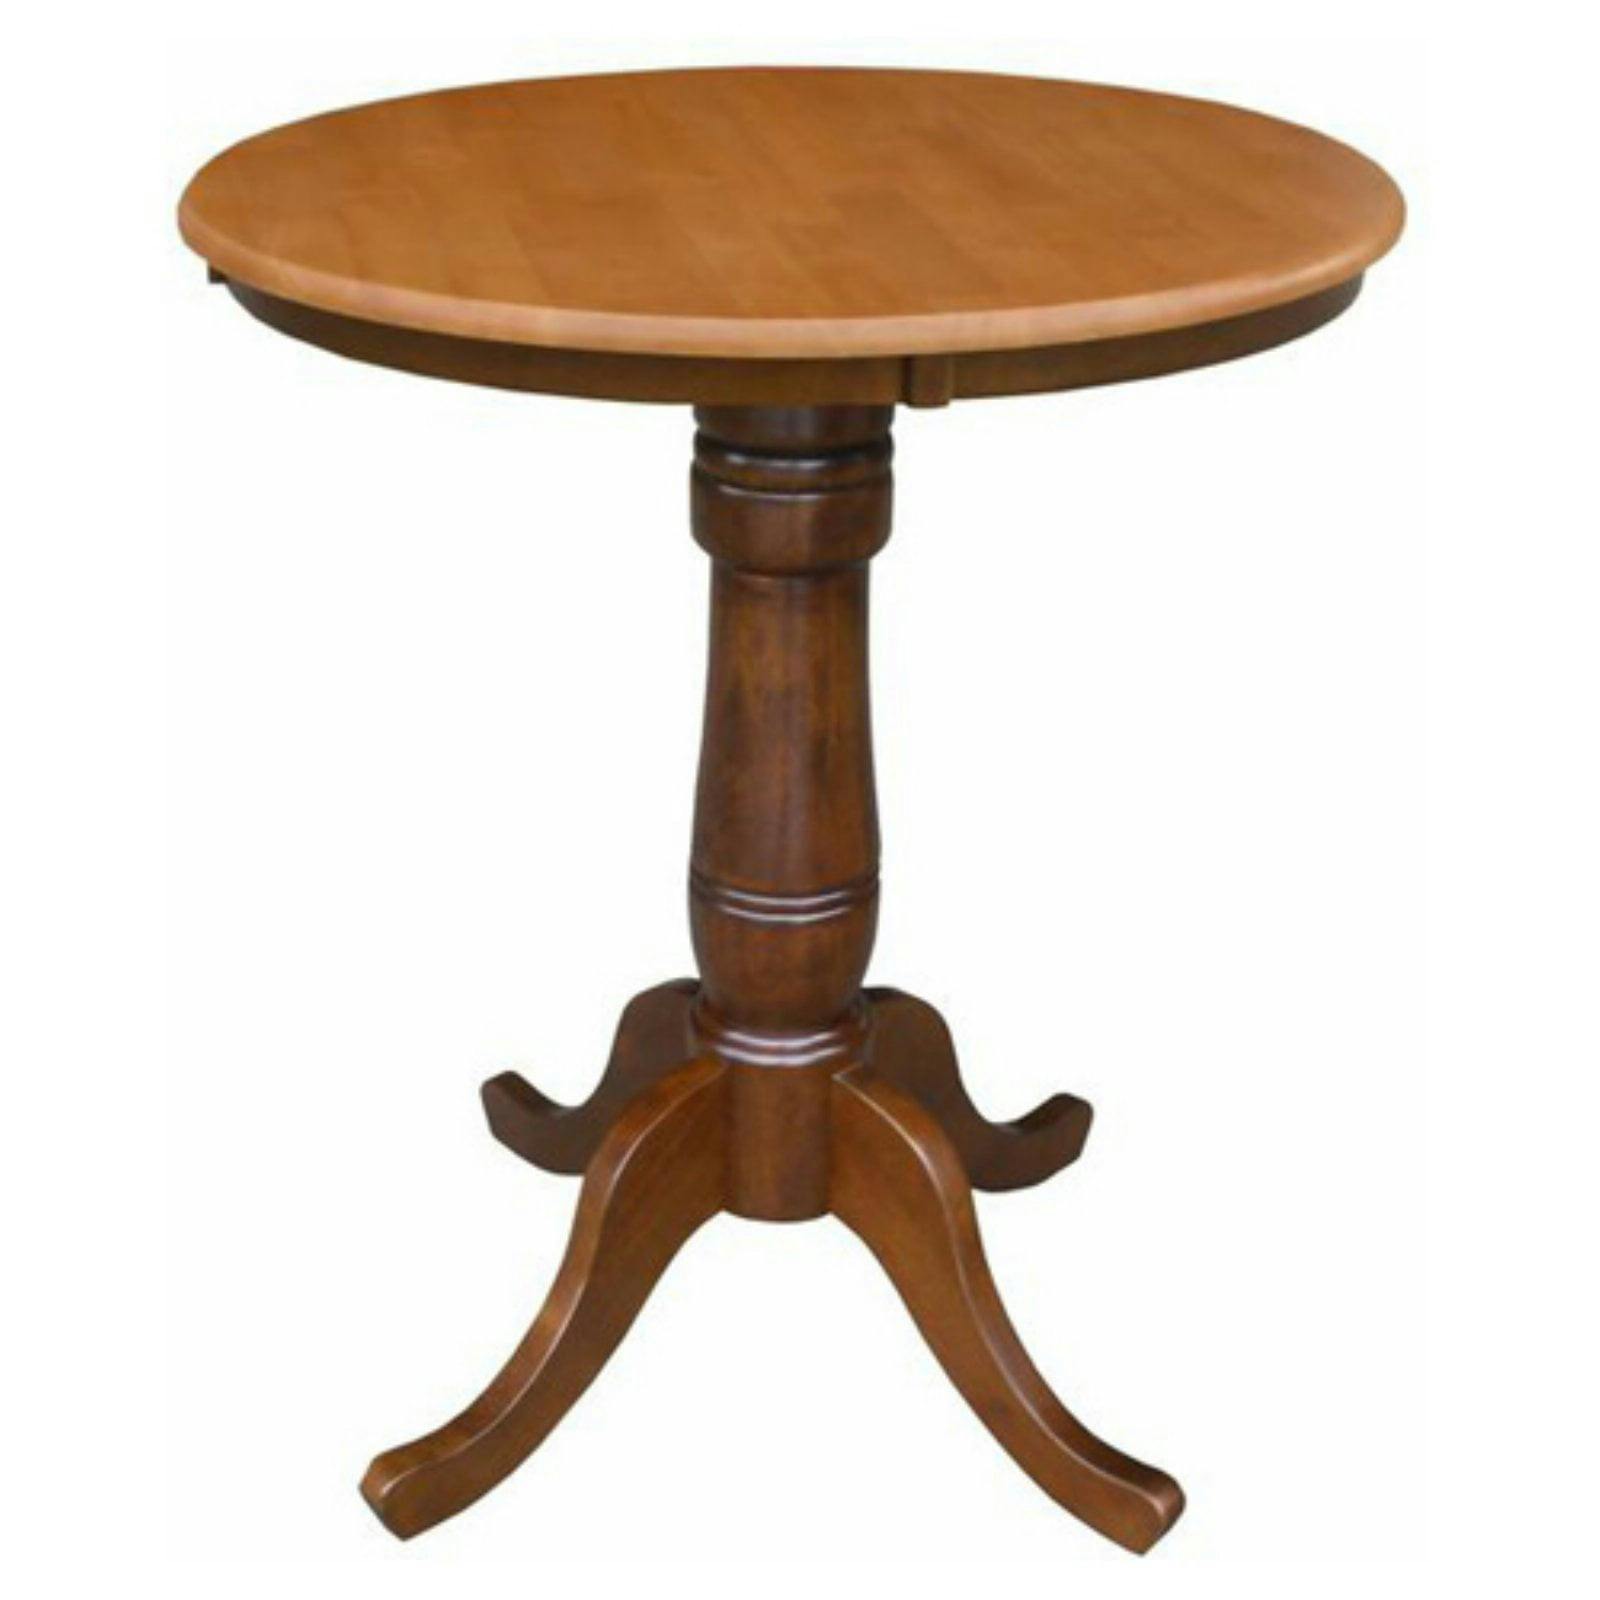 Farmhouse Charm 33" Round Extendable Wood Counter Height Table in Cinnamon